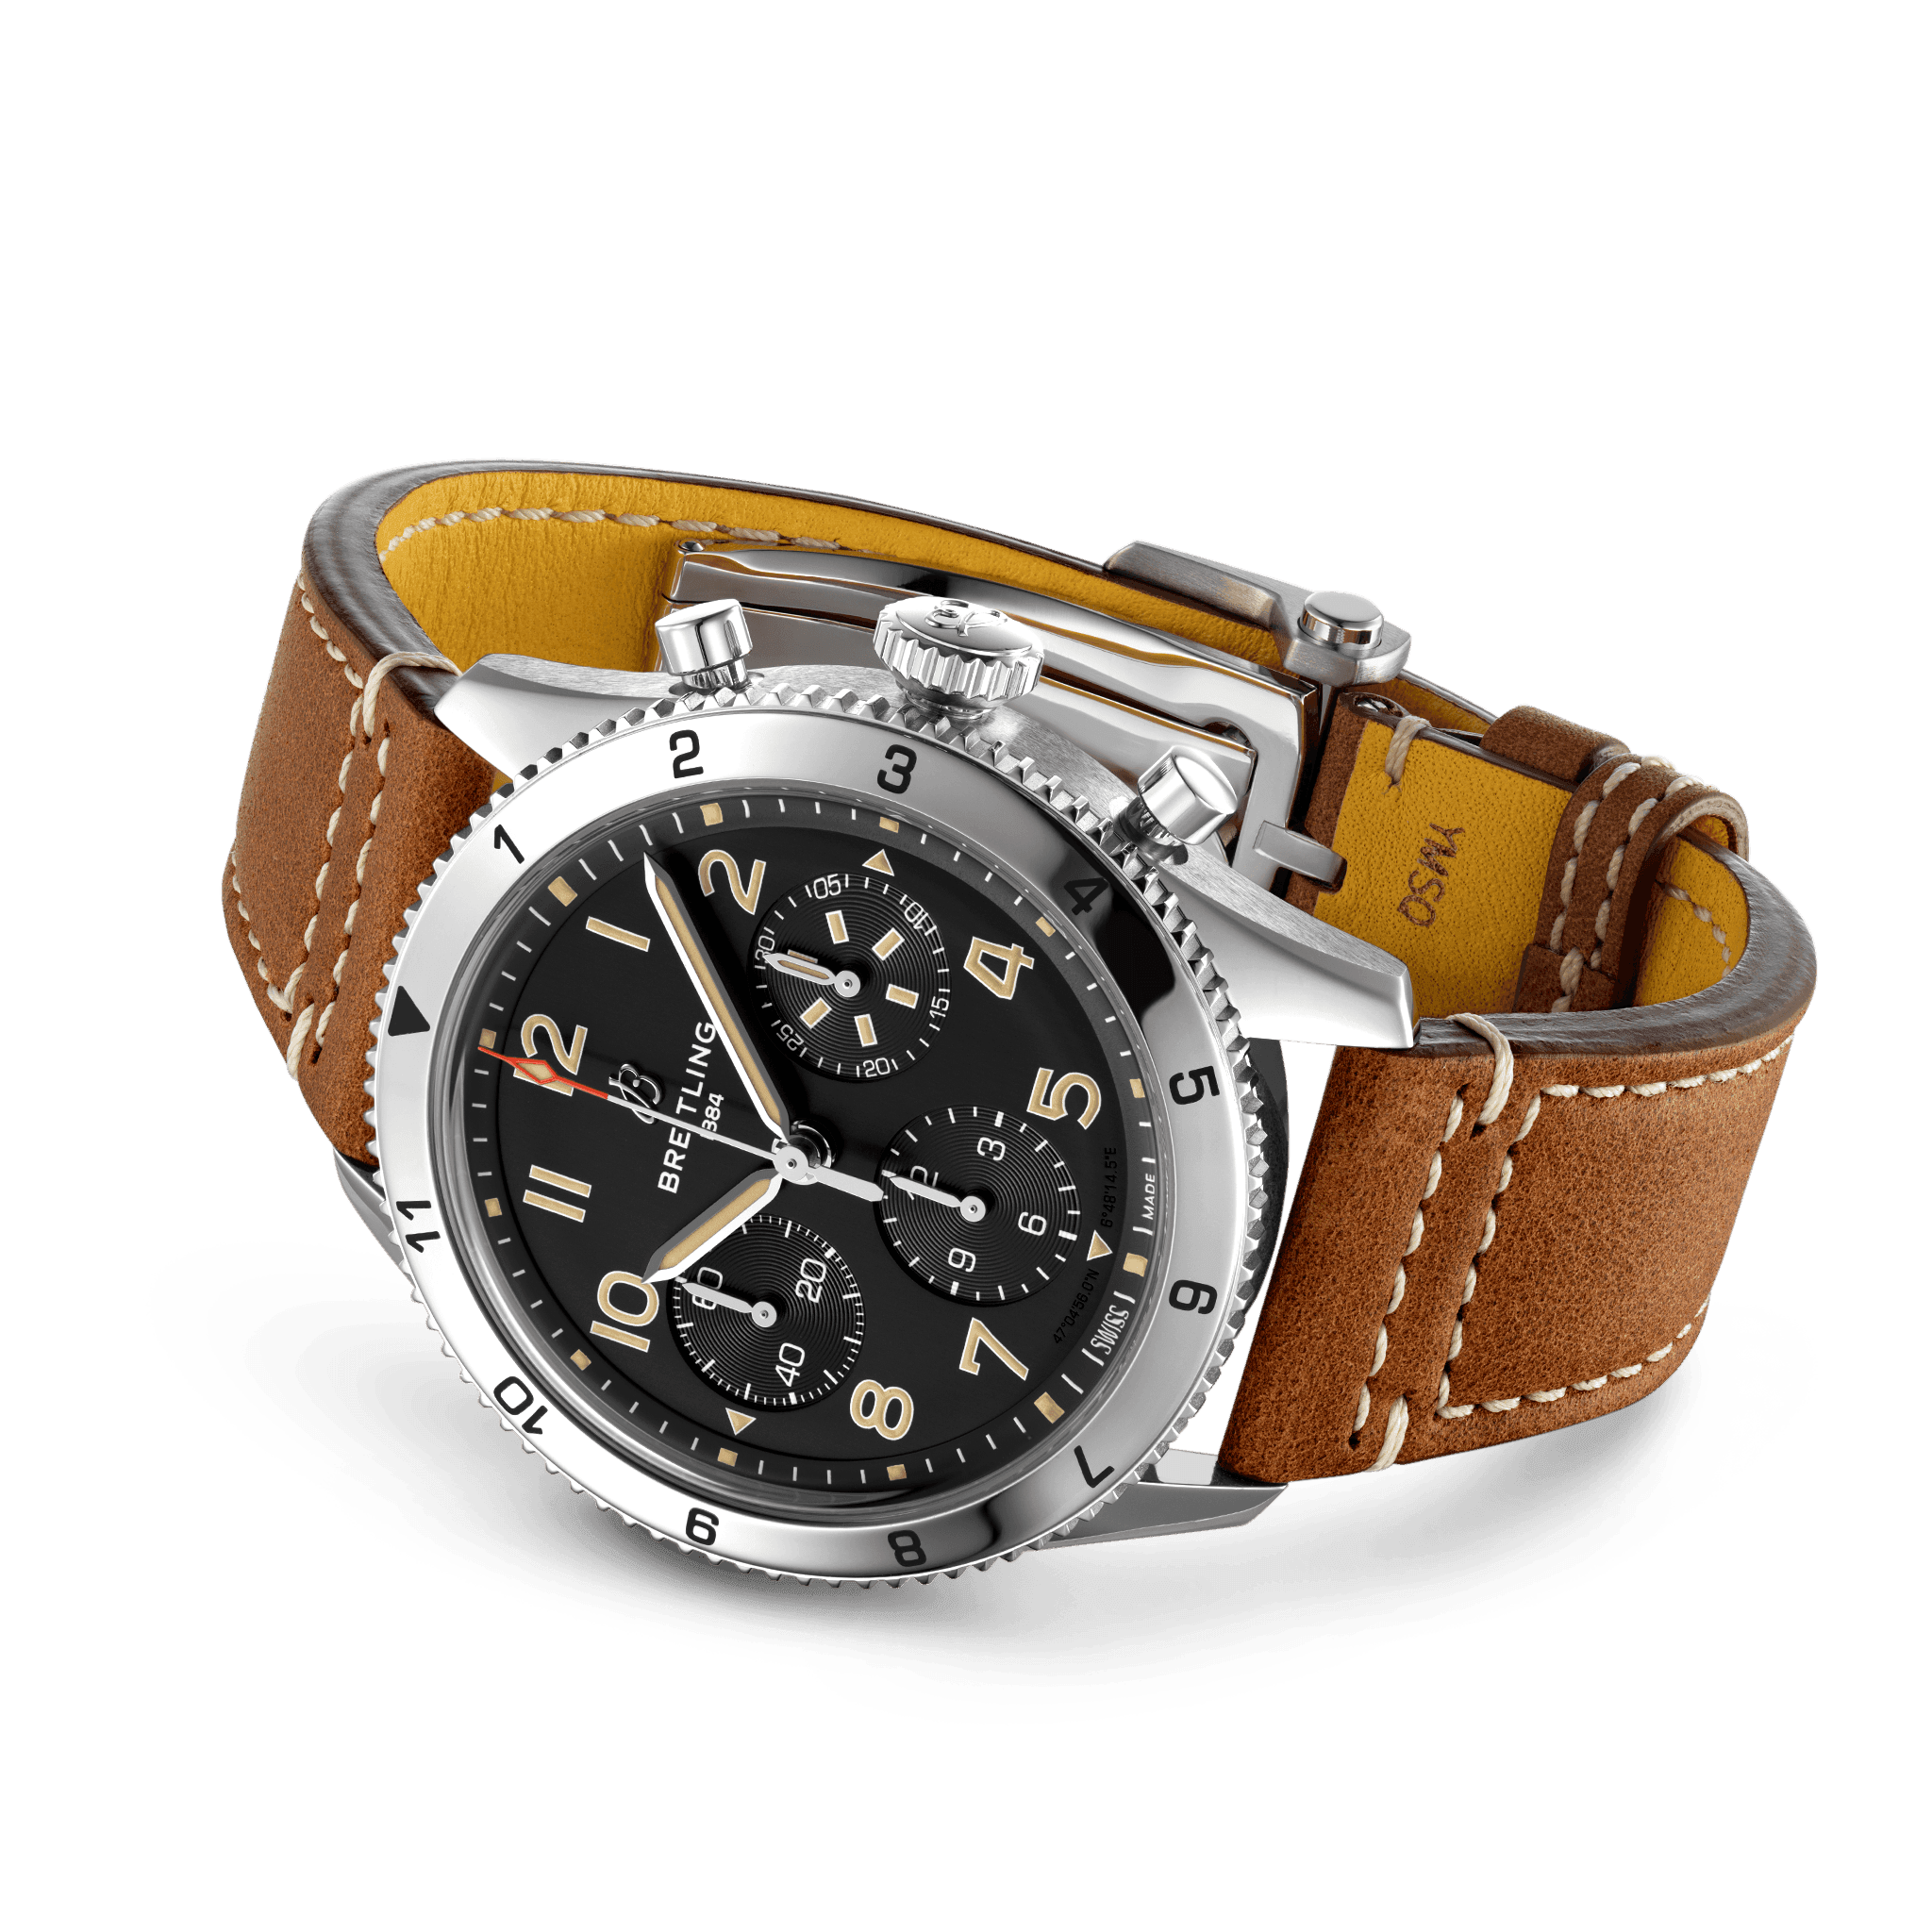 BREITLING CLASSIC AVI CHRONOGRAPH 42 P-51 MUSTANG AUTOMATIC 42 MM STAINLESS STEEL BLACK